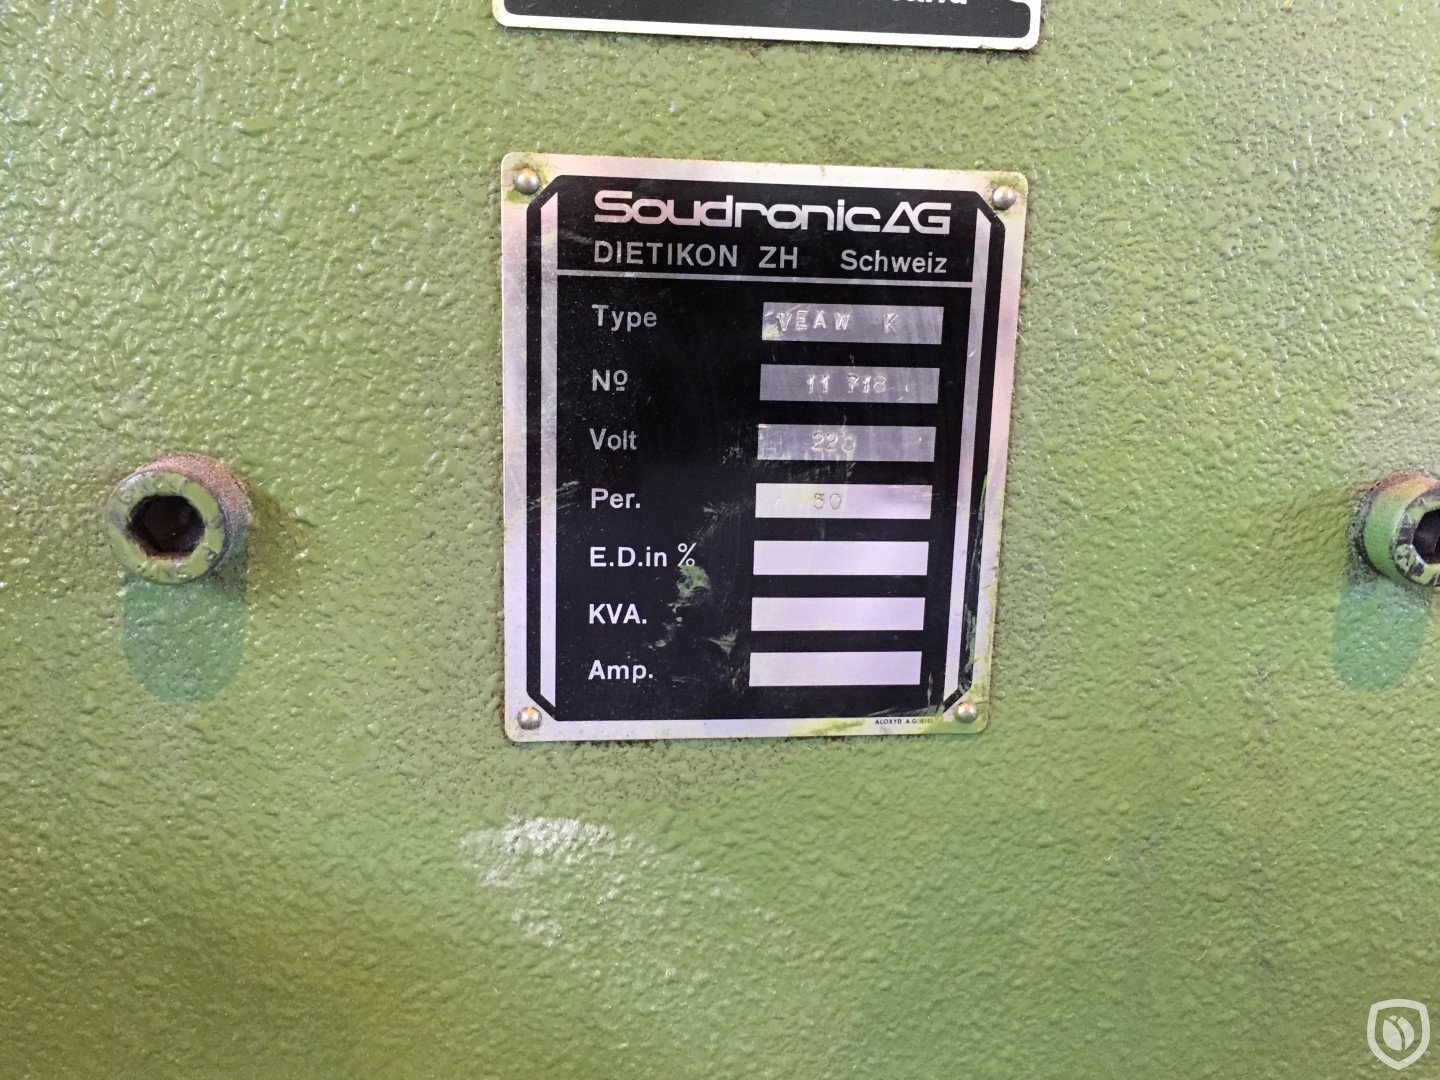 Soudronic VEAW K and Precision Tools FDC-150